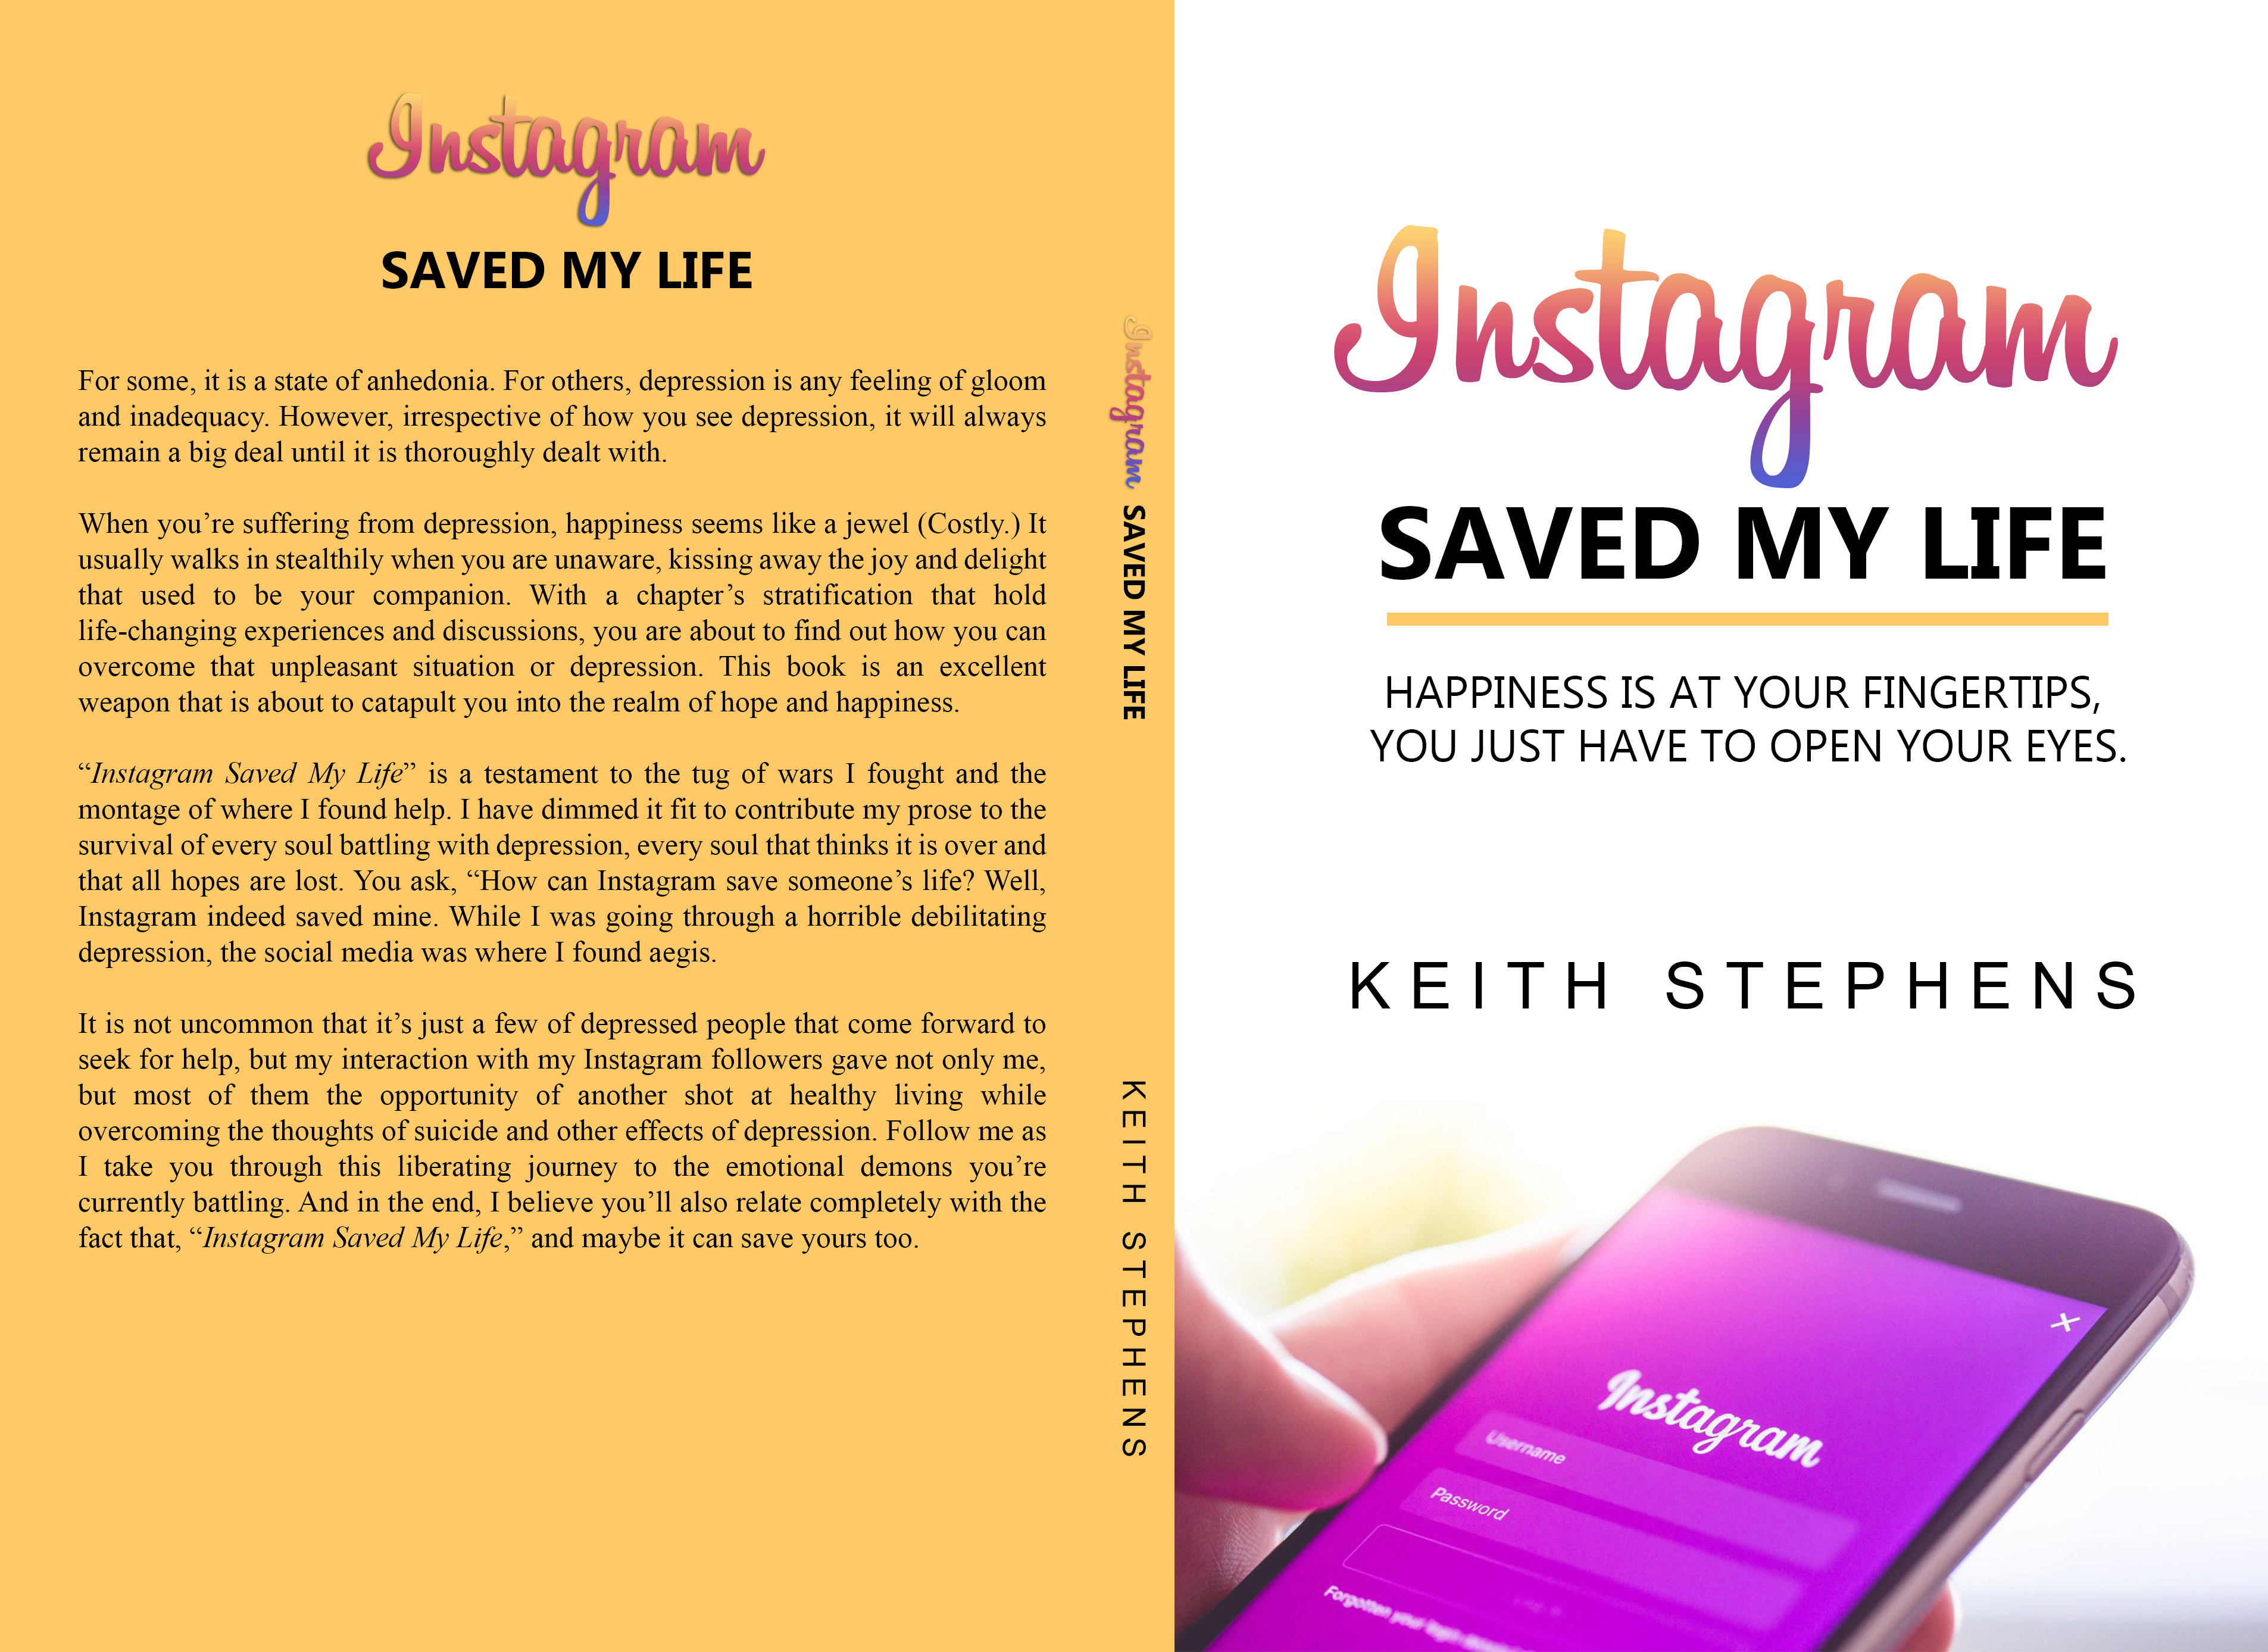 FREE: Instagram Saved My Life by Keith Stephens